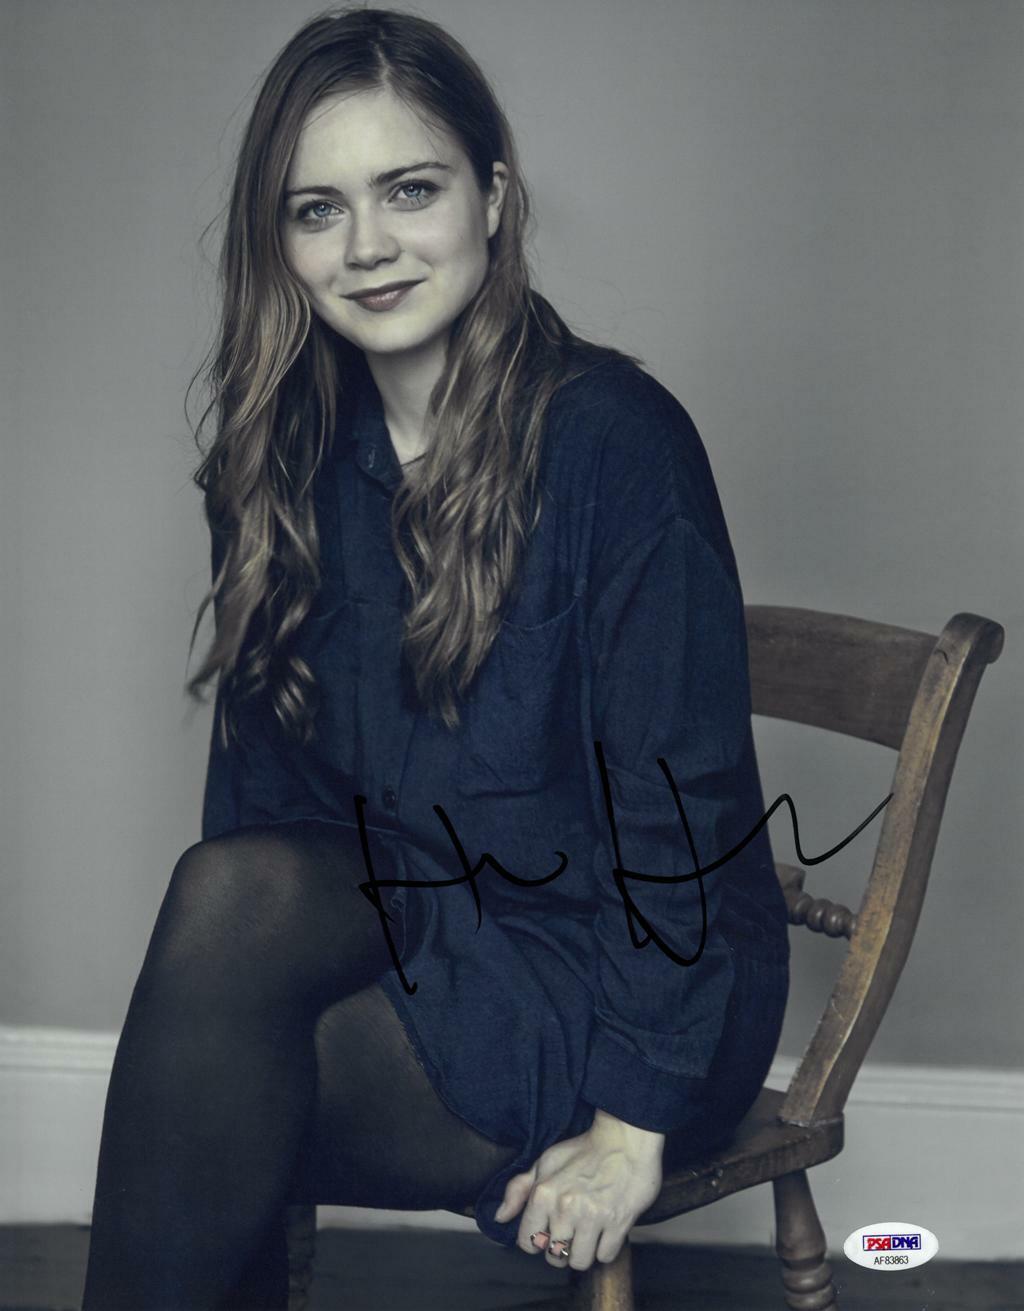 Hera Hilmar Signed Authentic Autographed 11x14 Photo Poster painting PSA/DNA #AF83863